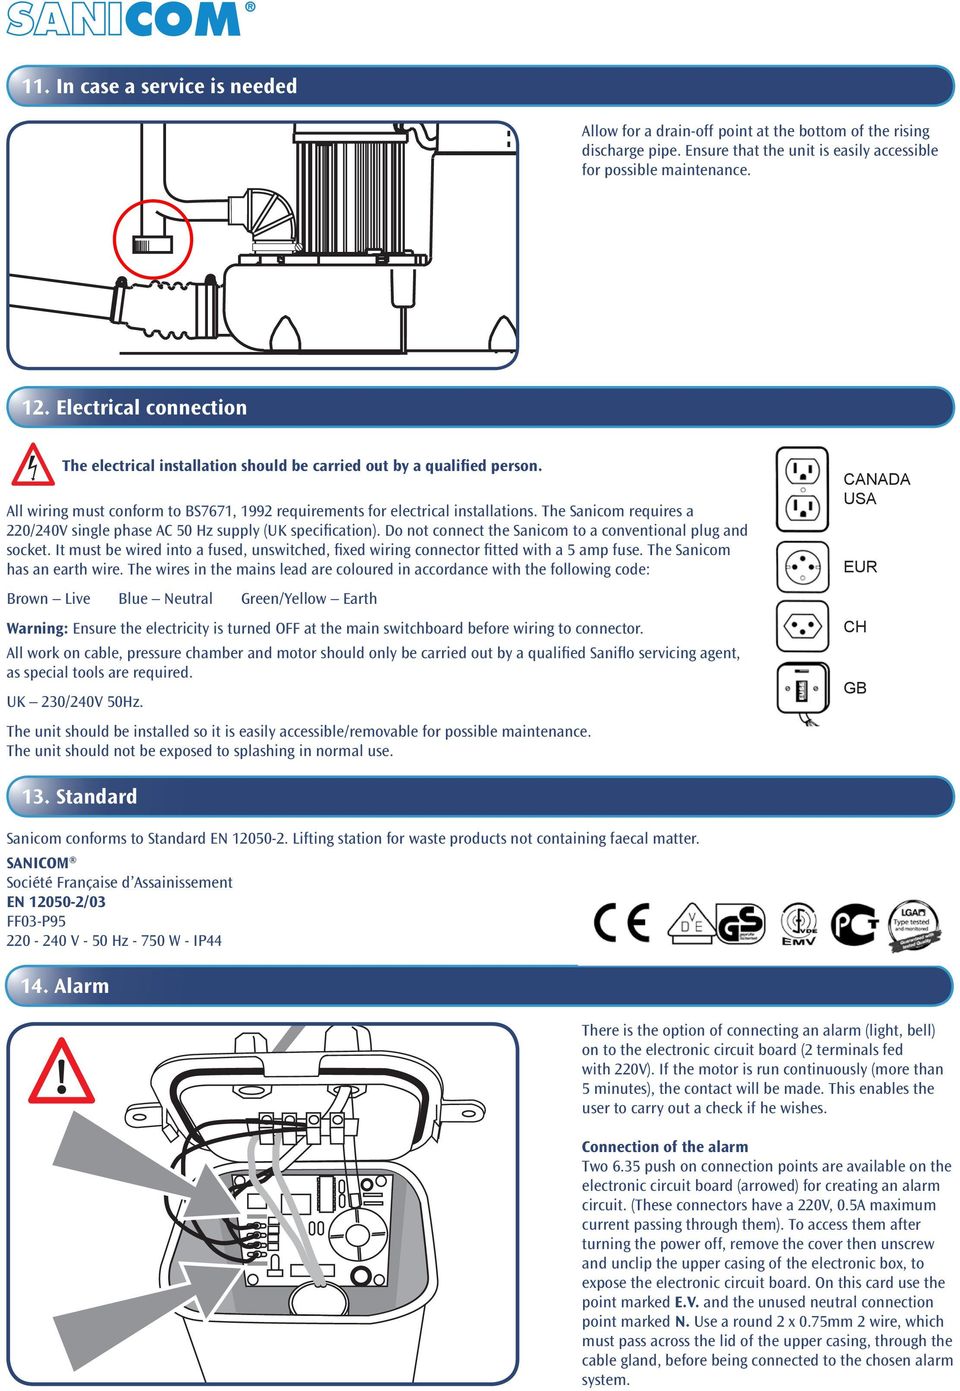 The Sanicom requires a 220/240V single phase AC 50 Hz supply (UK specification). Do not connect the Sanicom to a conventional plug and socket.